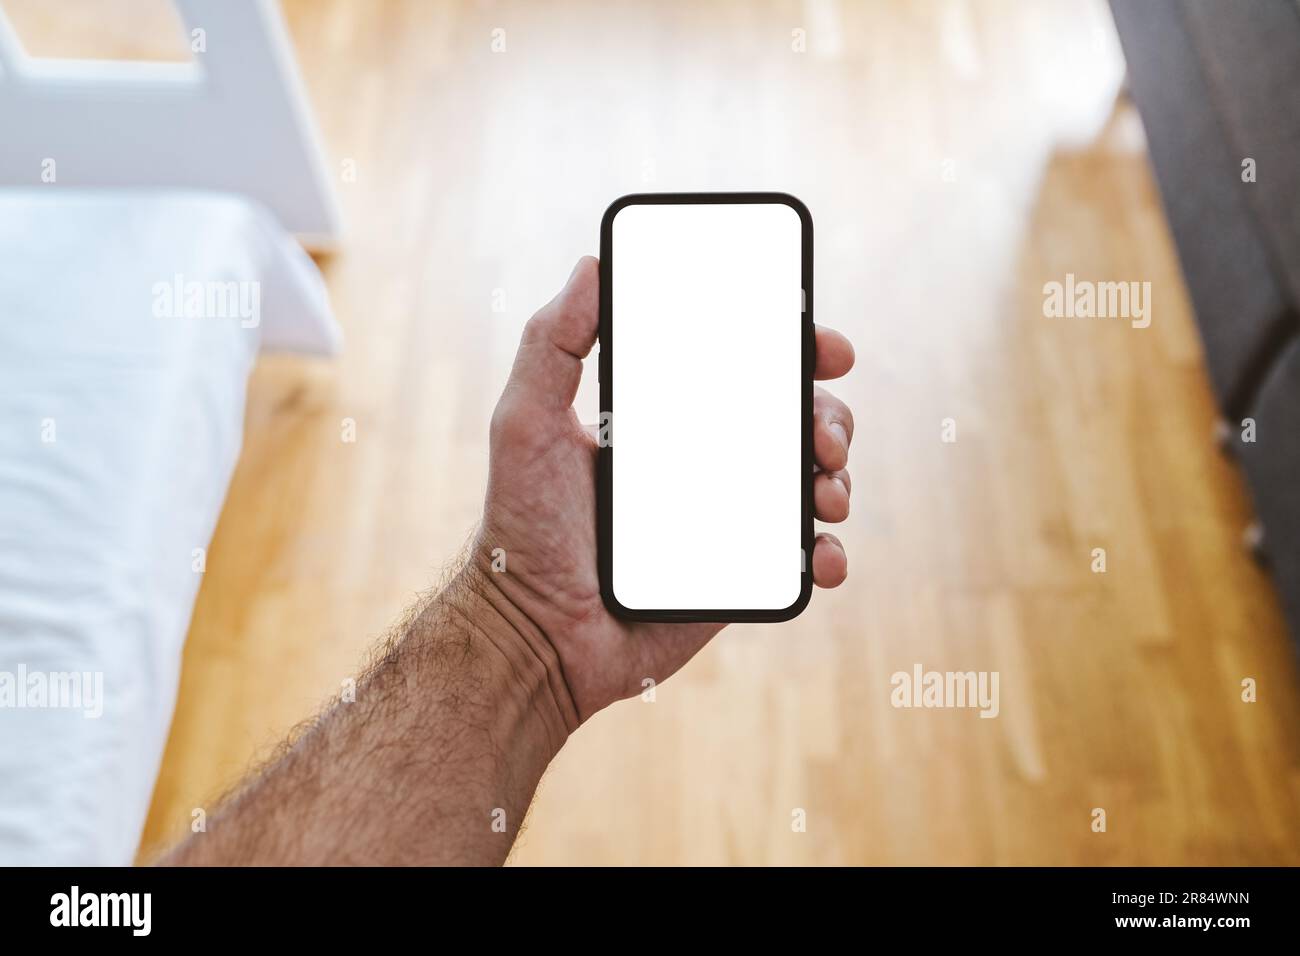 Man holding smart phone device with blank mockup screen in bedroom. Copy space for app or text message. Selective focus. Stock Photo